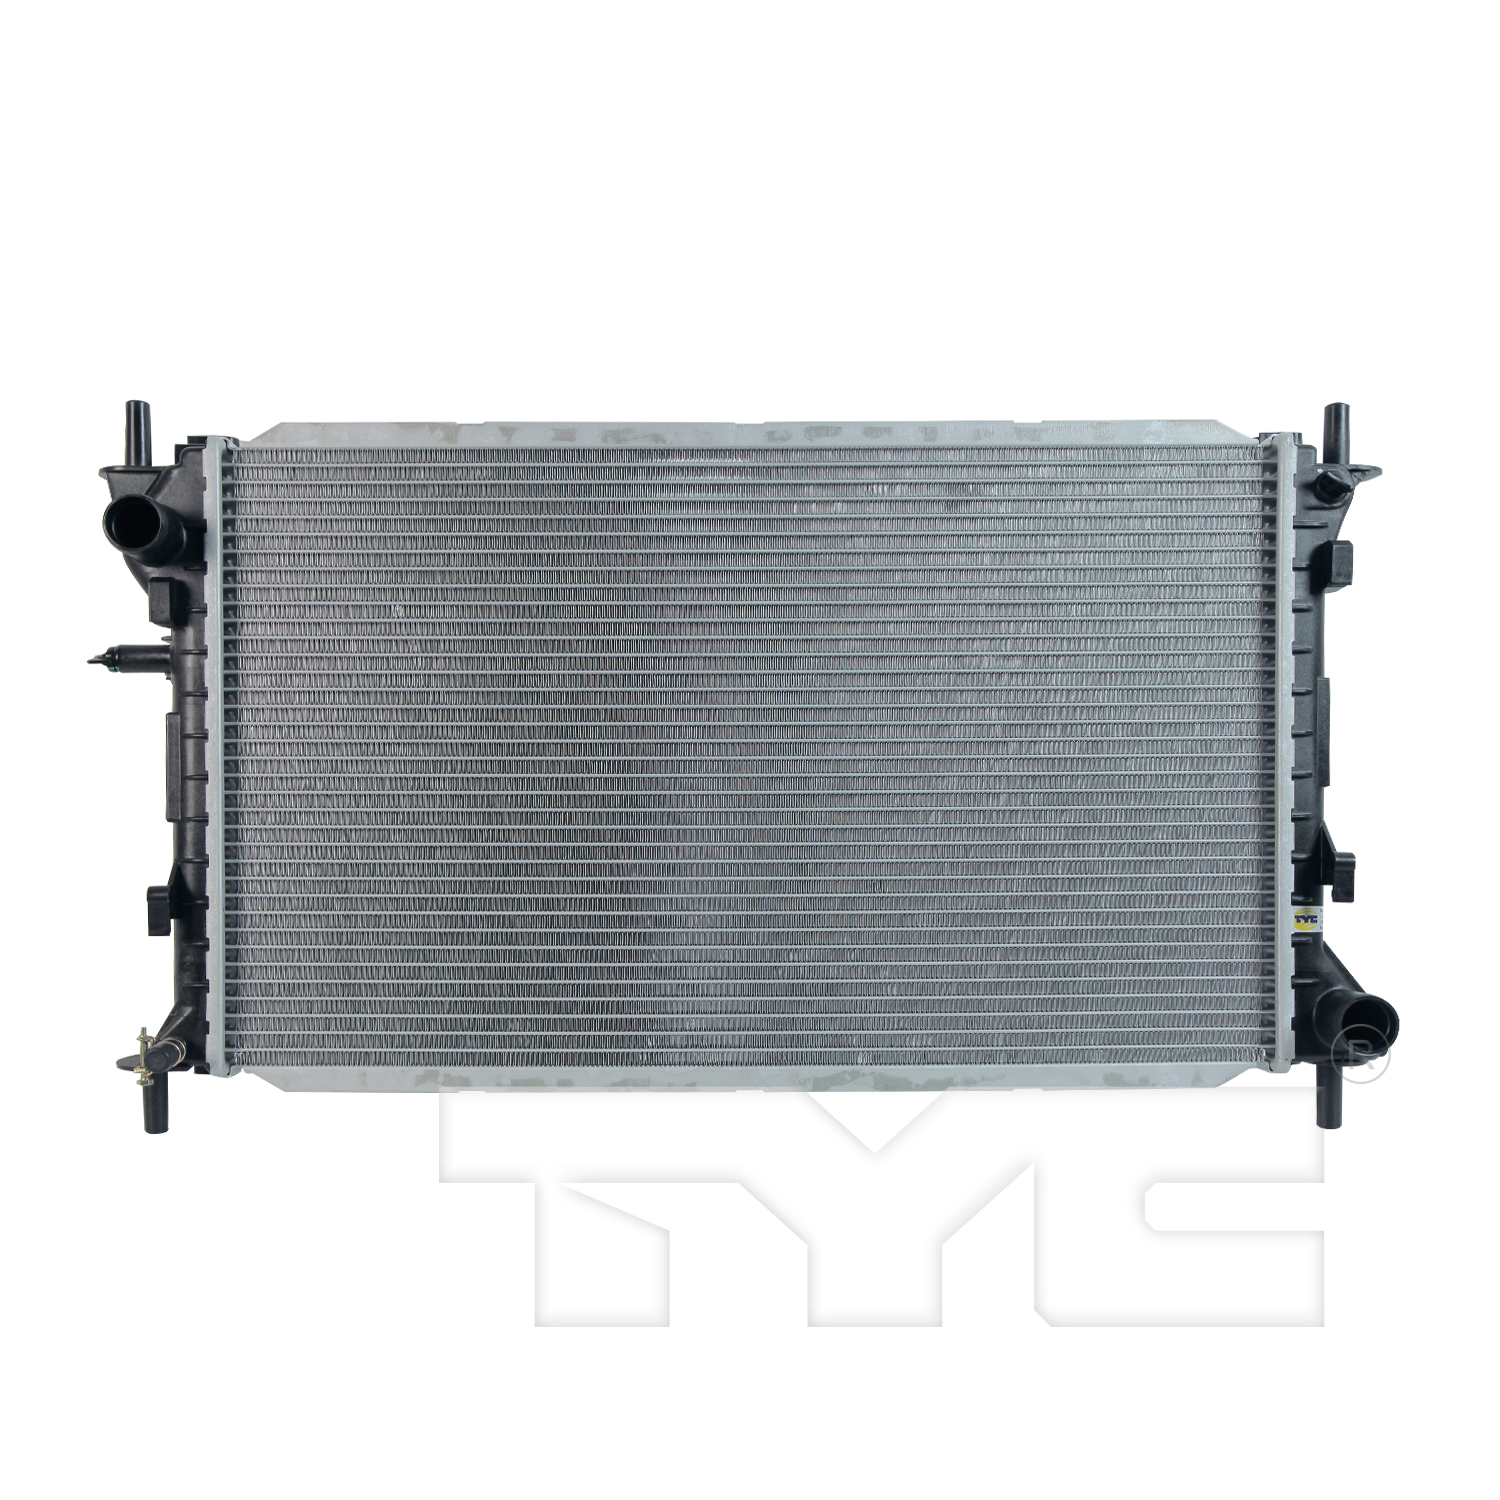 Aftermarket RADIATORS for FORD - FOCUS, FOCUS,00-04,Radiator assembly